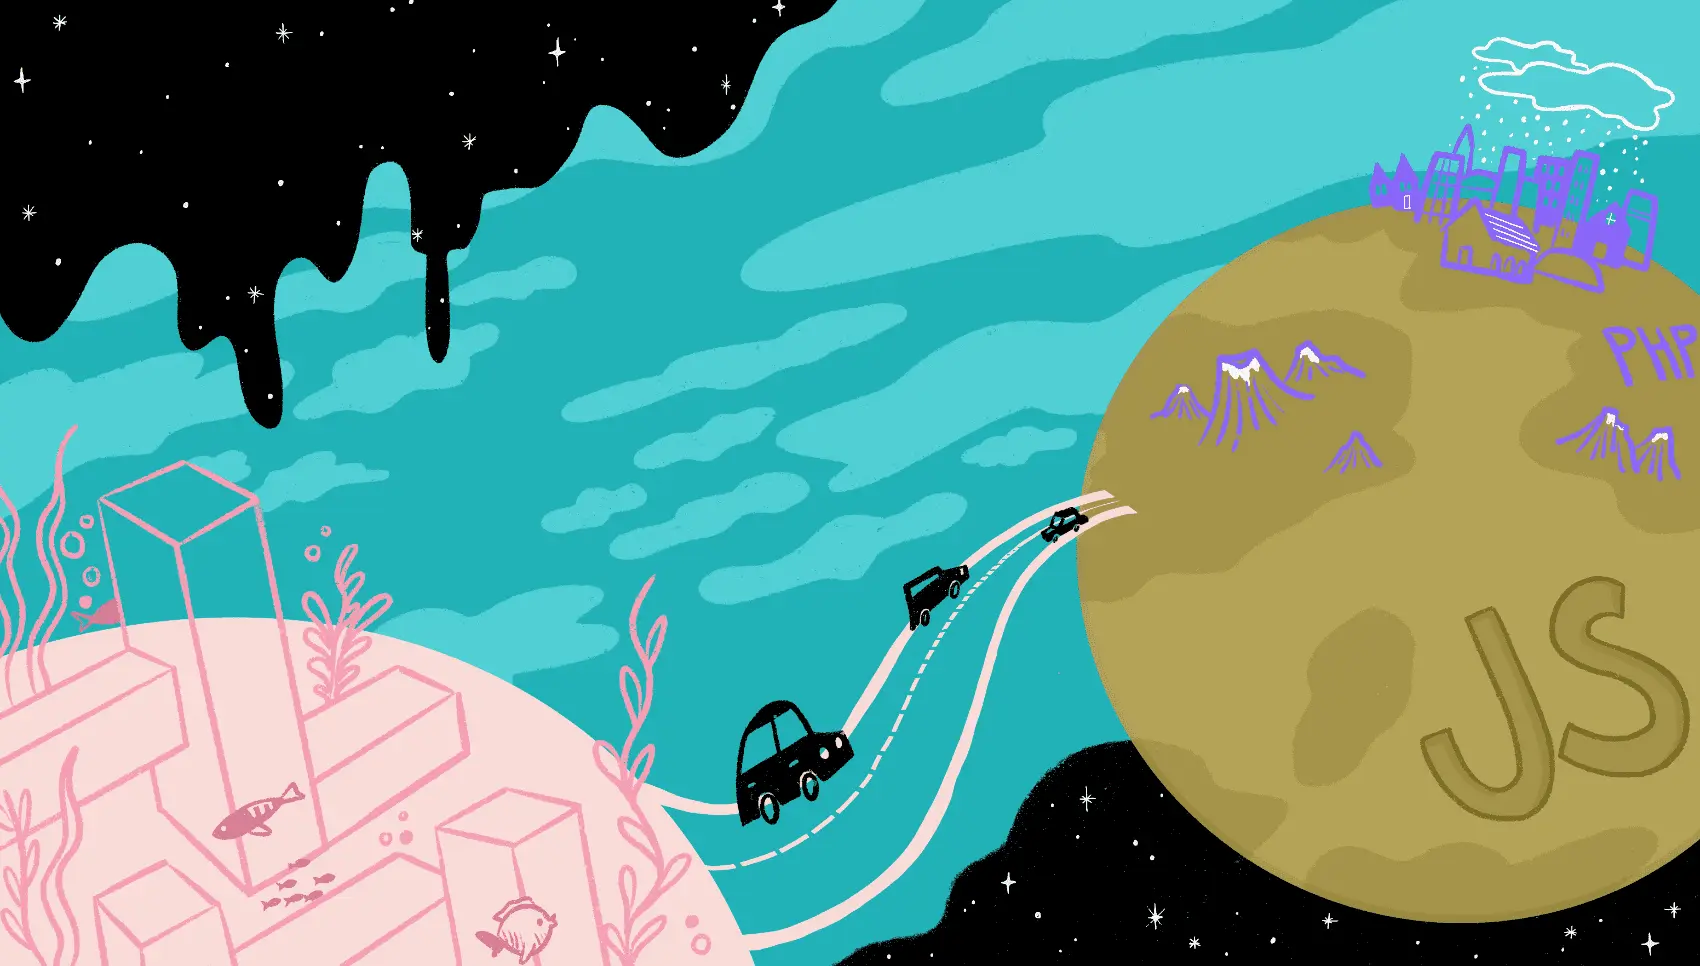 The background is set in a dark, but star-studded outerspace. Two planets are bridged together with a winding bridge, similar to two slightly-curled ribbons enclosing a highway road. The first planet to the left is aquatic with a pink hue, while the planet to the right is a terrain containing "JS" and "PHP" engraved in its soil.